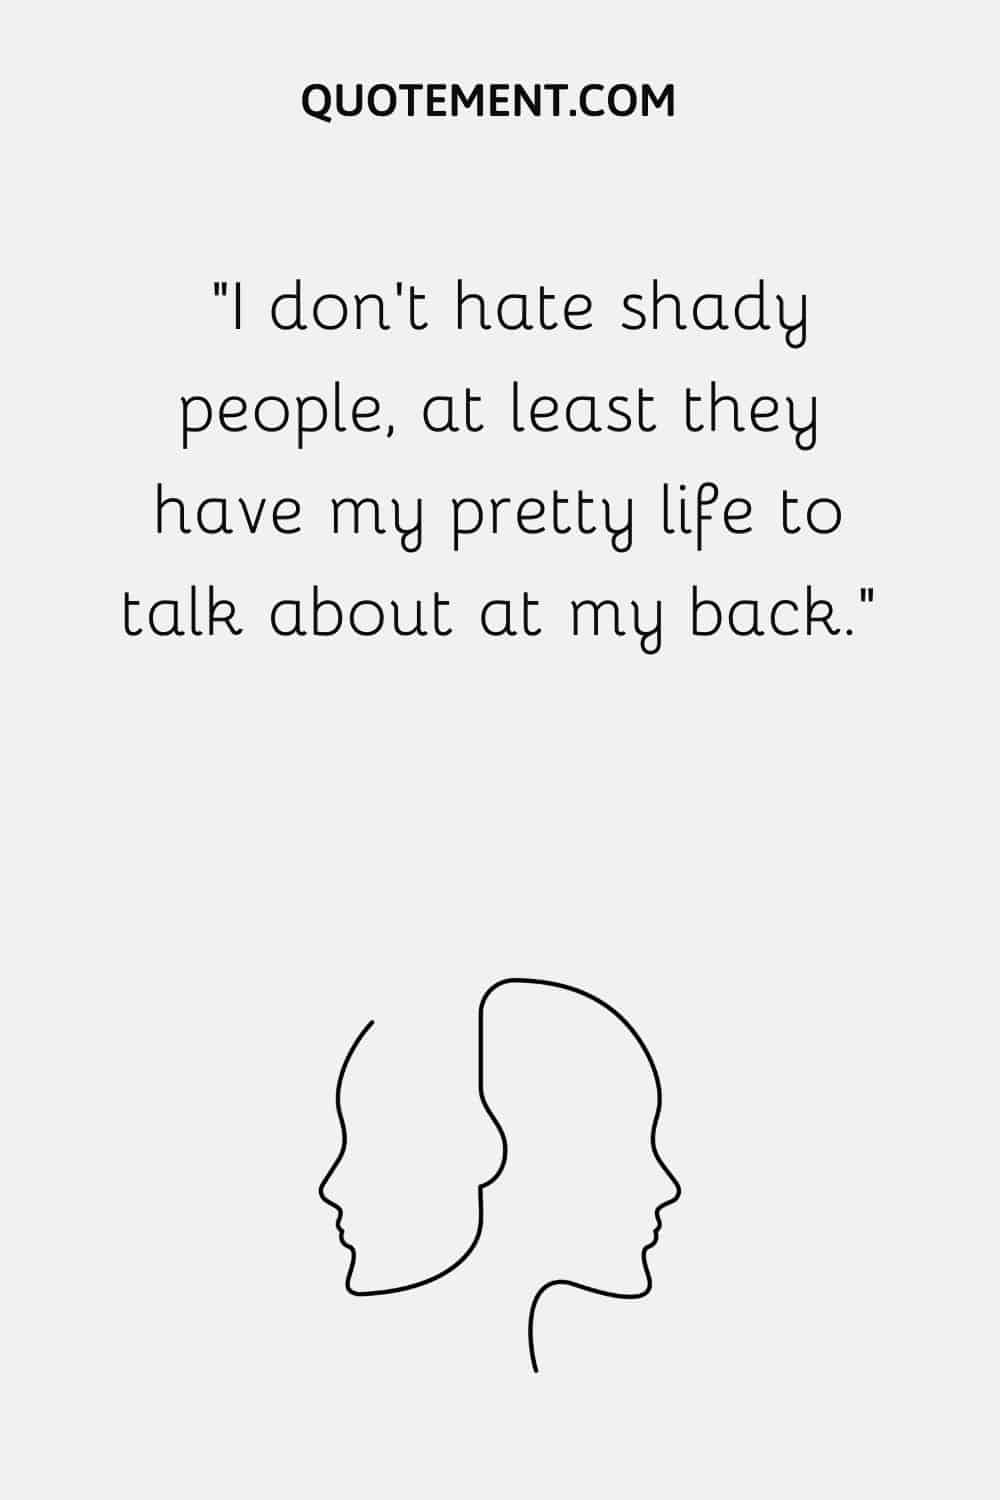 I don’t hate shady people, at least they have my pretty life to talk about at my back